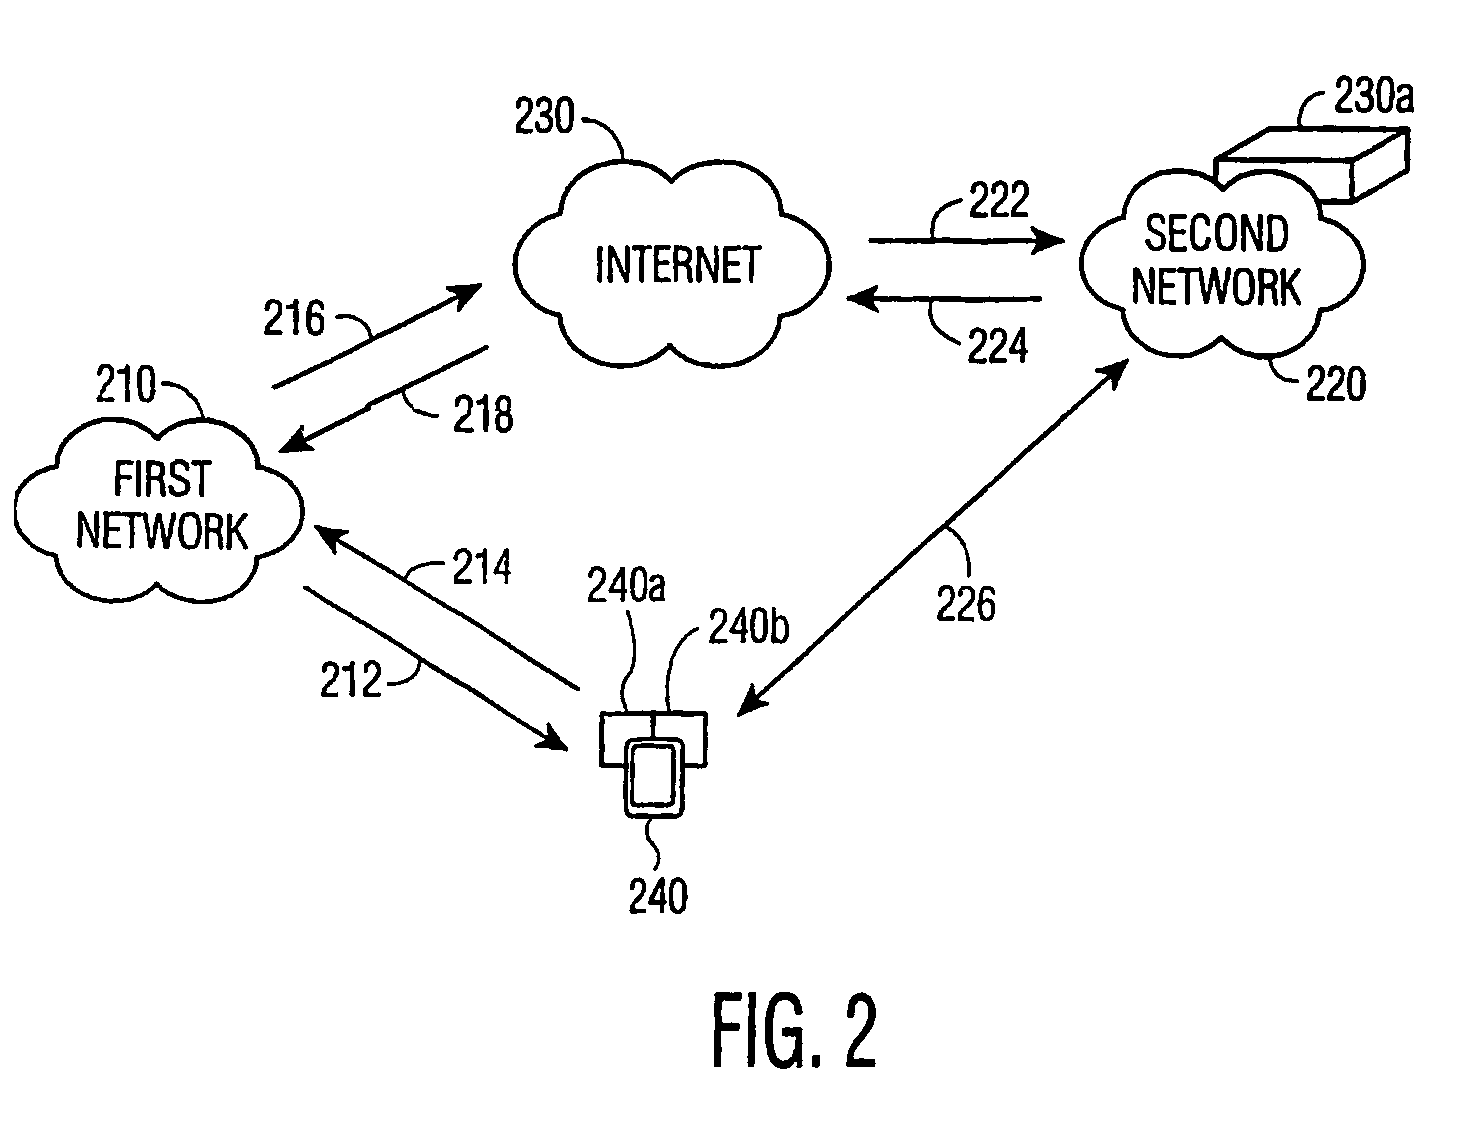 Transitive authentication authorization accounting in the interworking between access networks